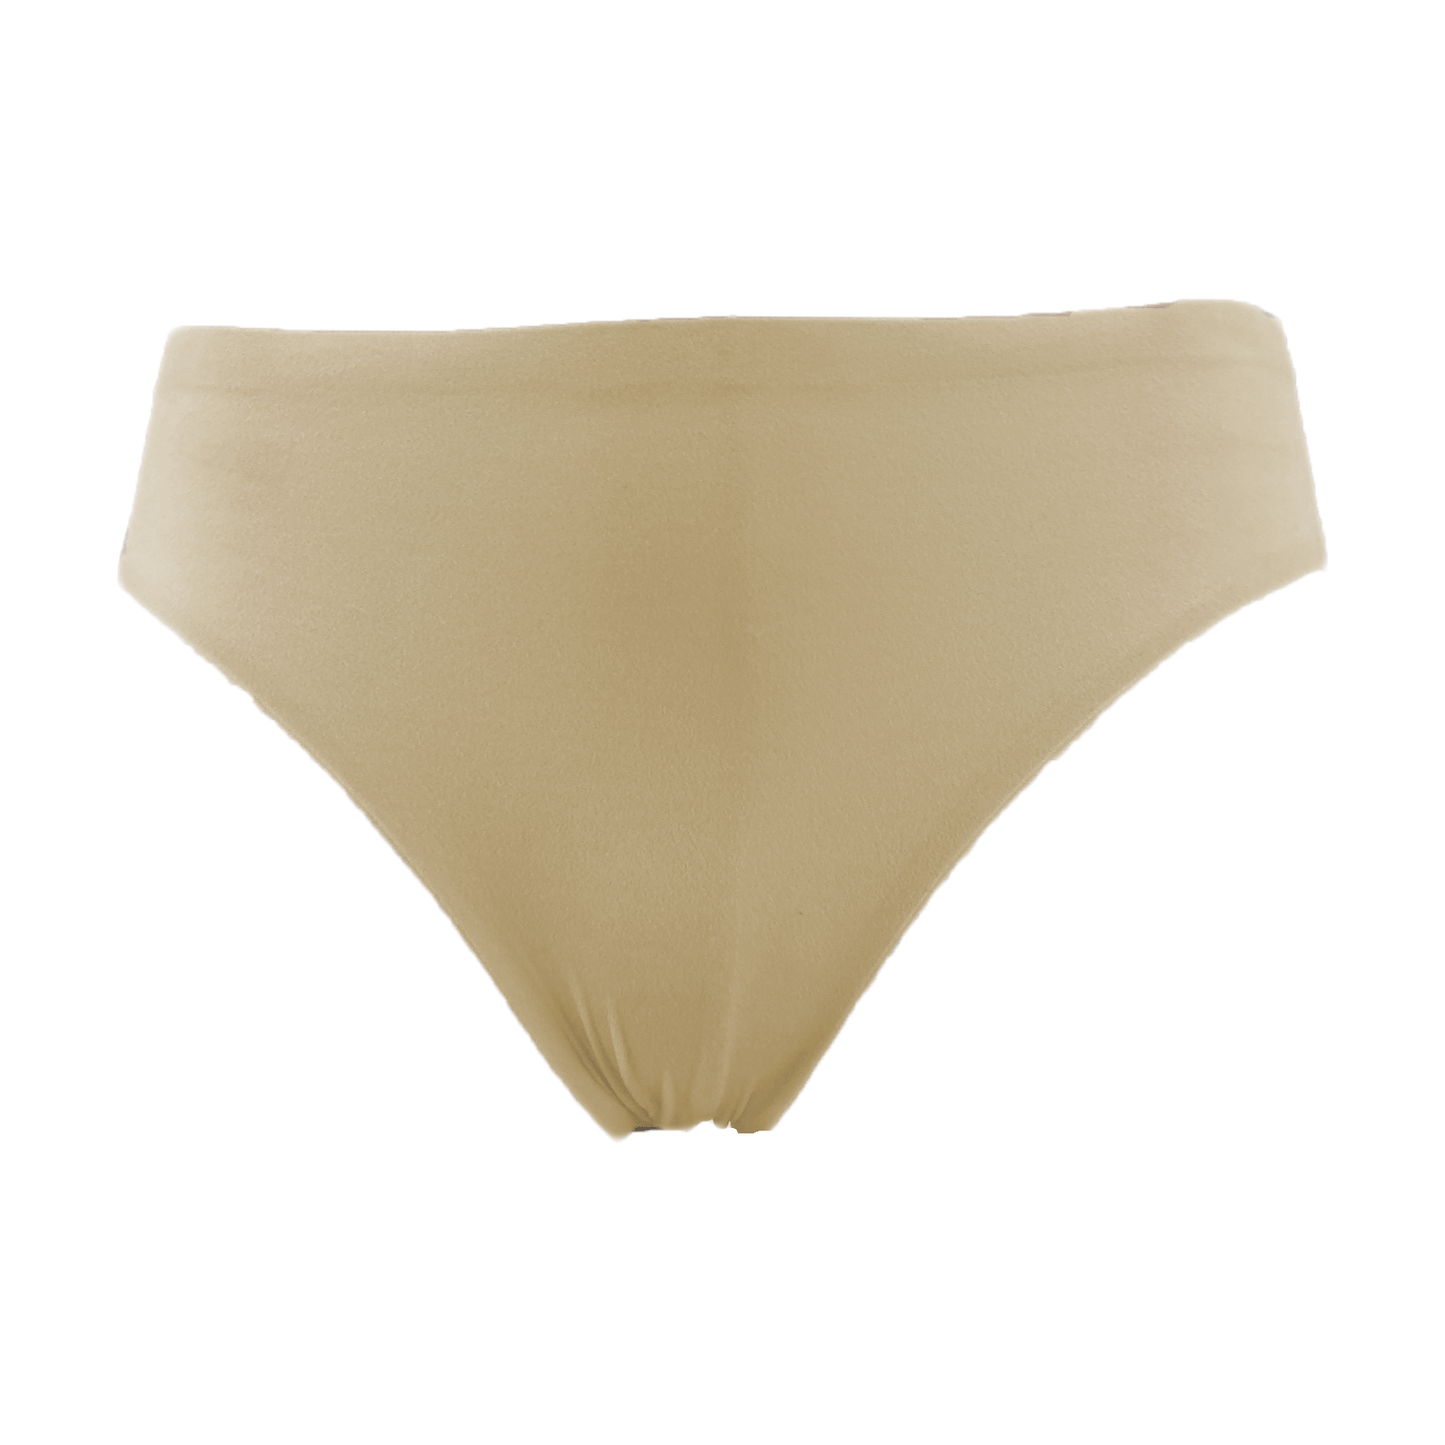 Silky Adult’s Invisible High Cut Briefs